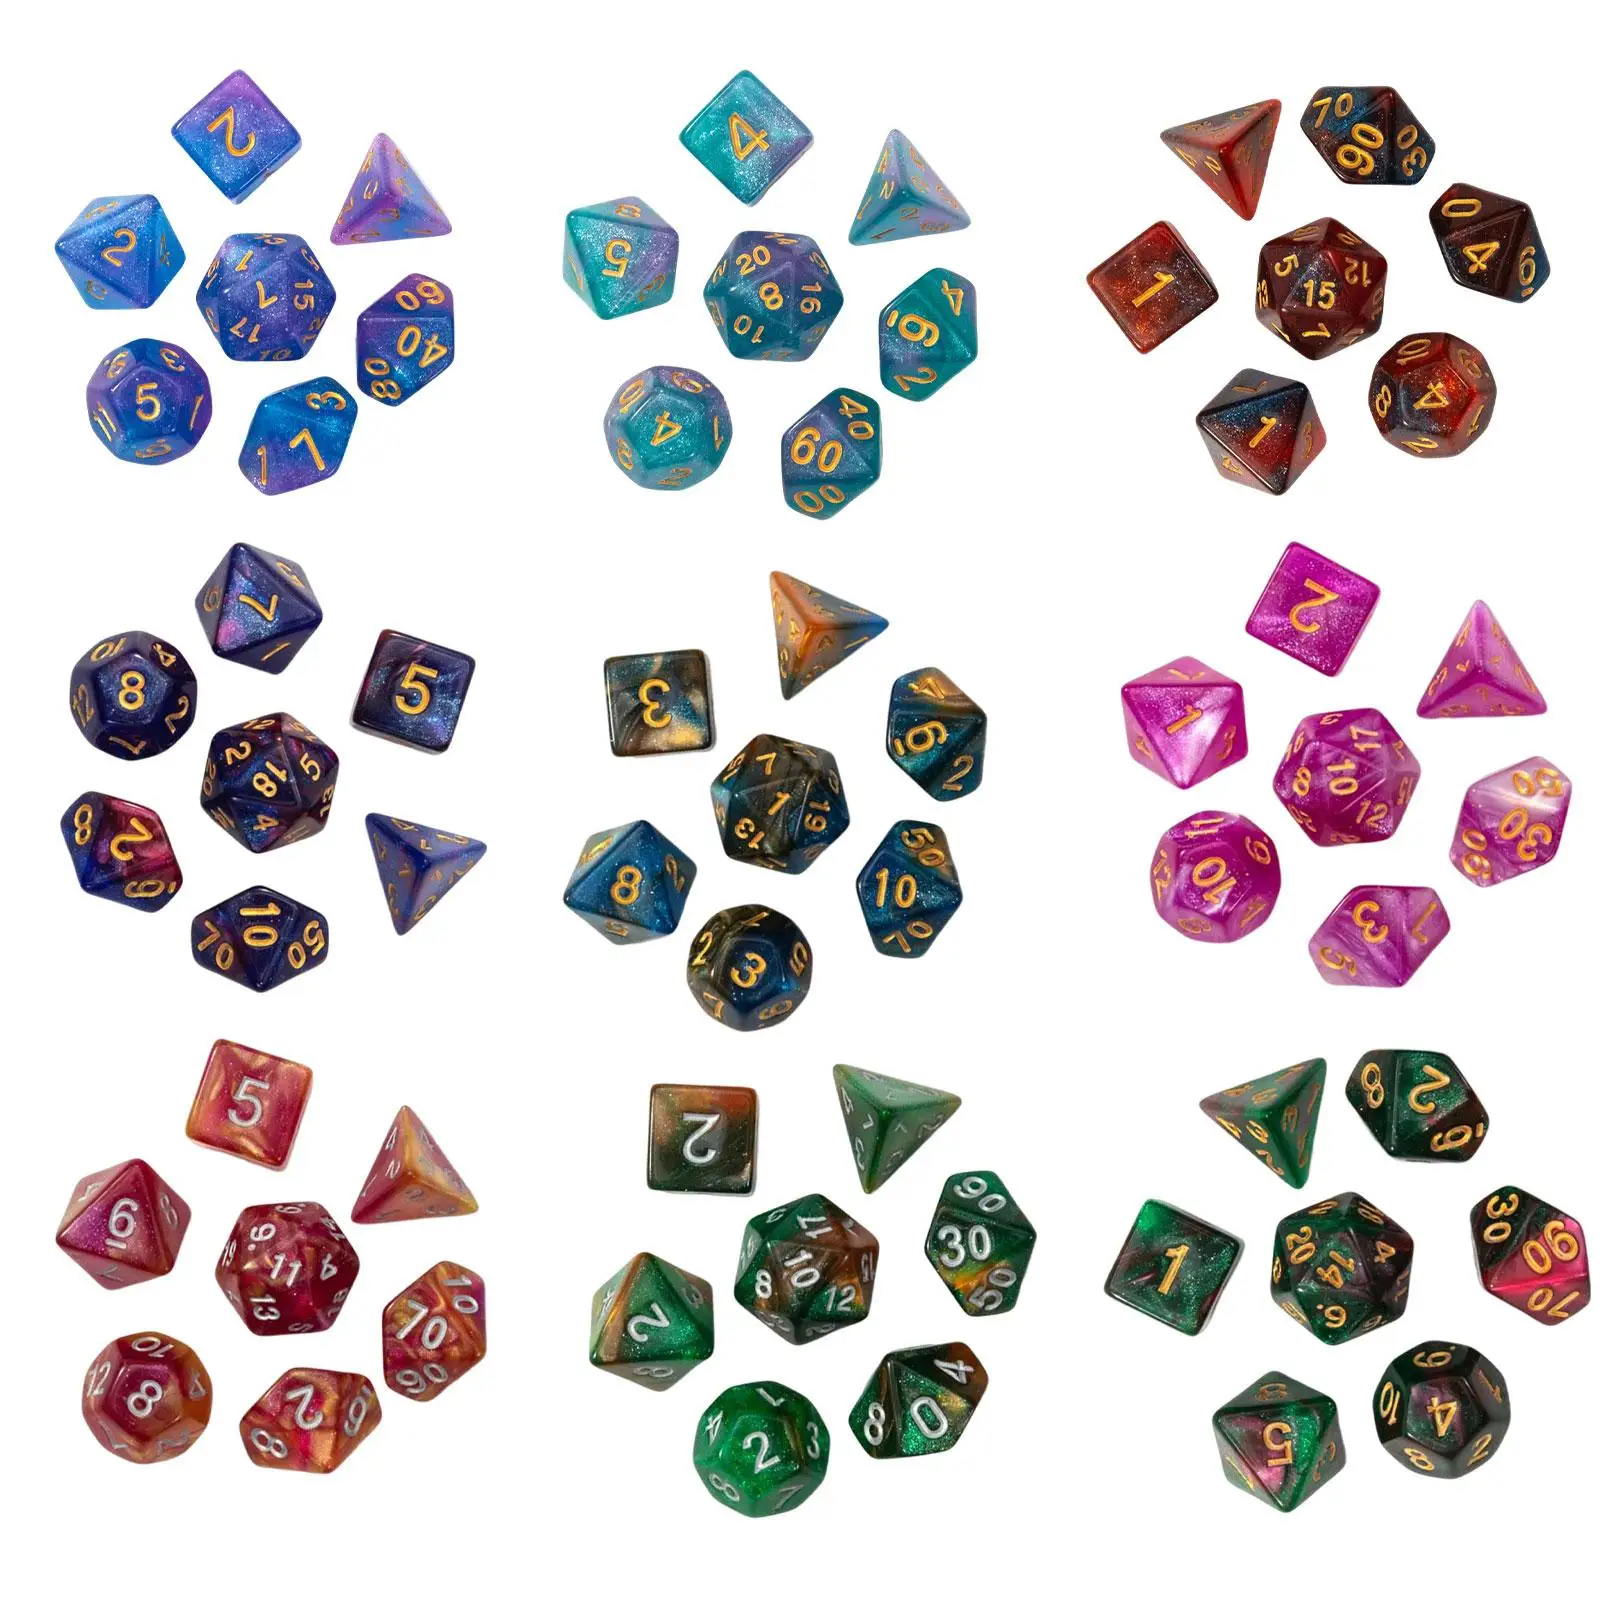 

7x Polyhedral Dices Set Bar Toys D4 D8 D10 D12 D20 Acrylic Dices for Card Games Role Playing RPG Board Game